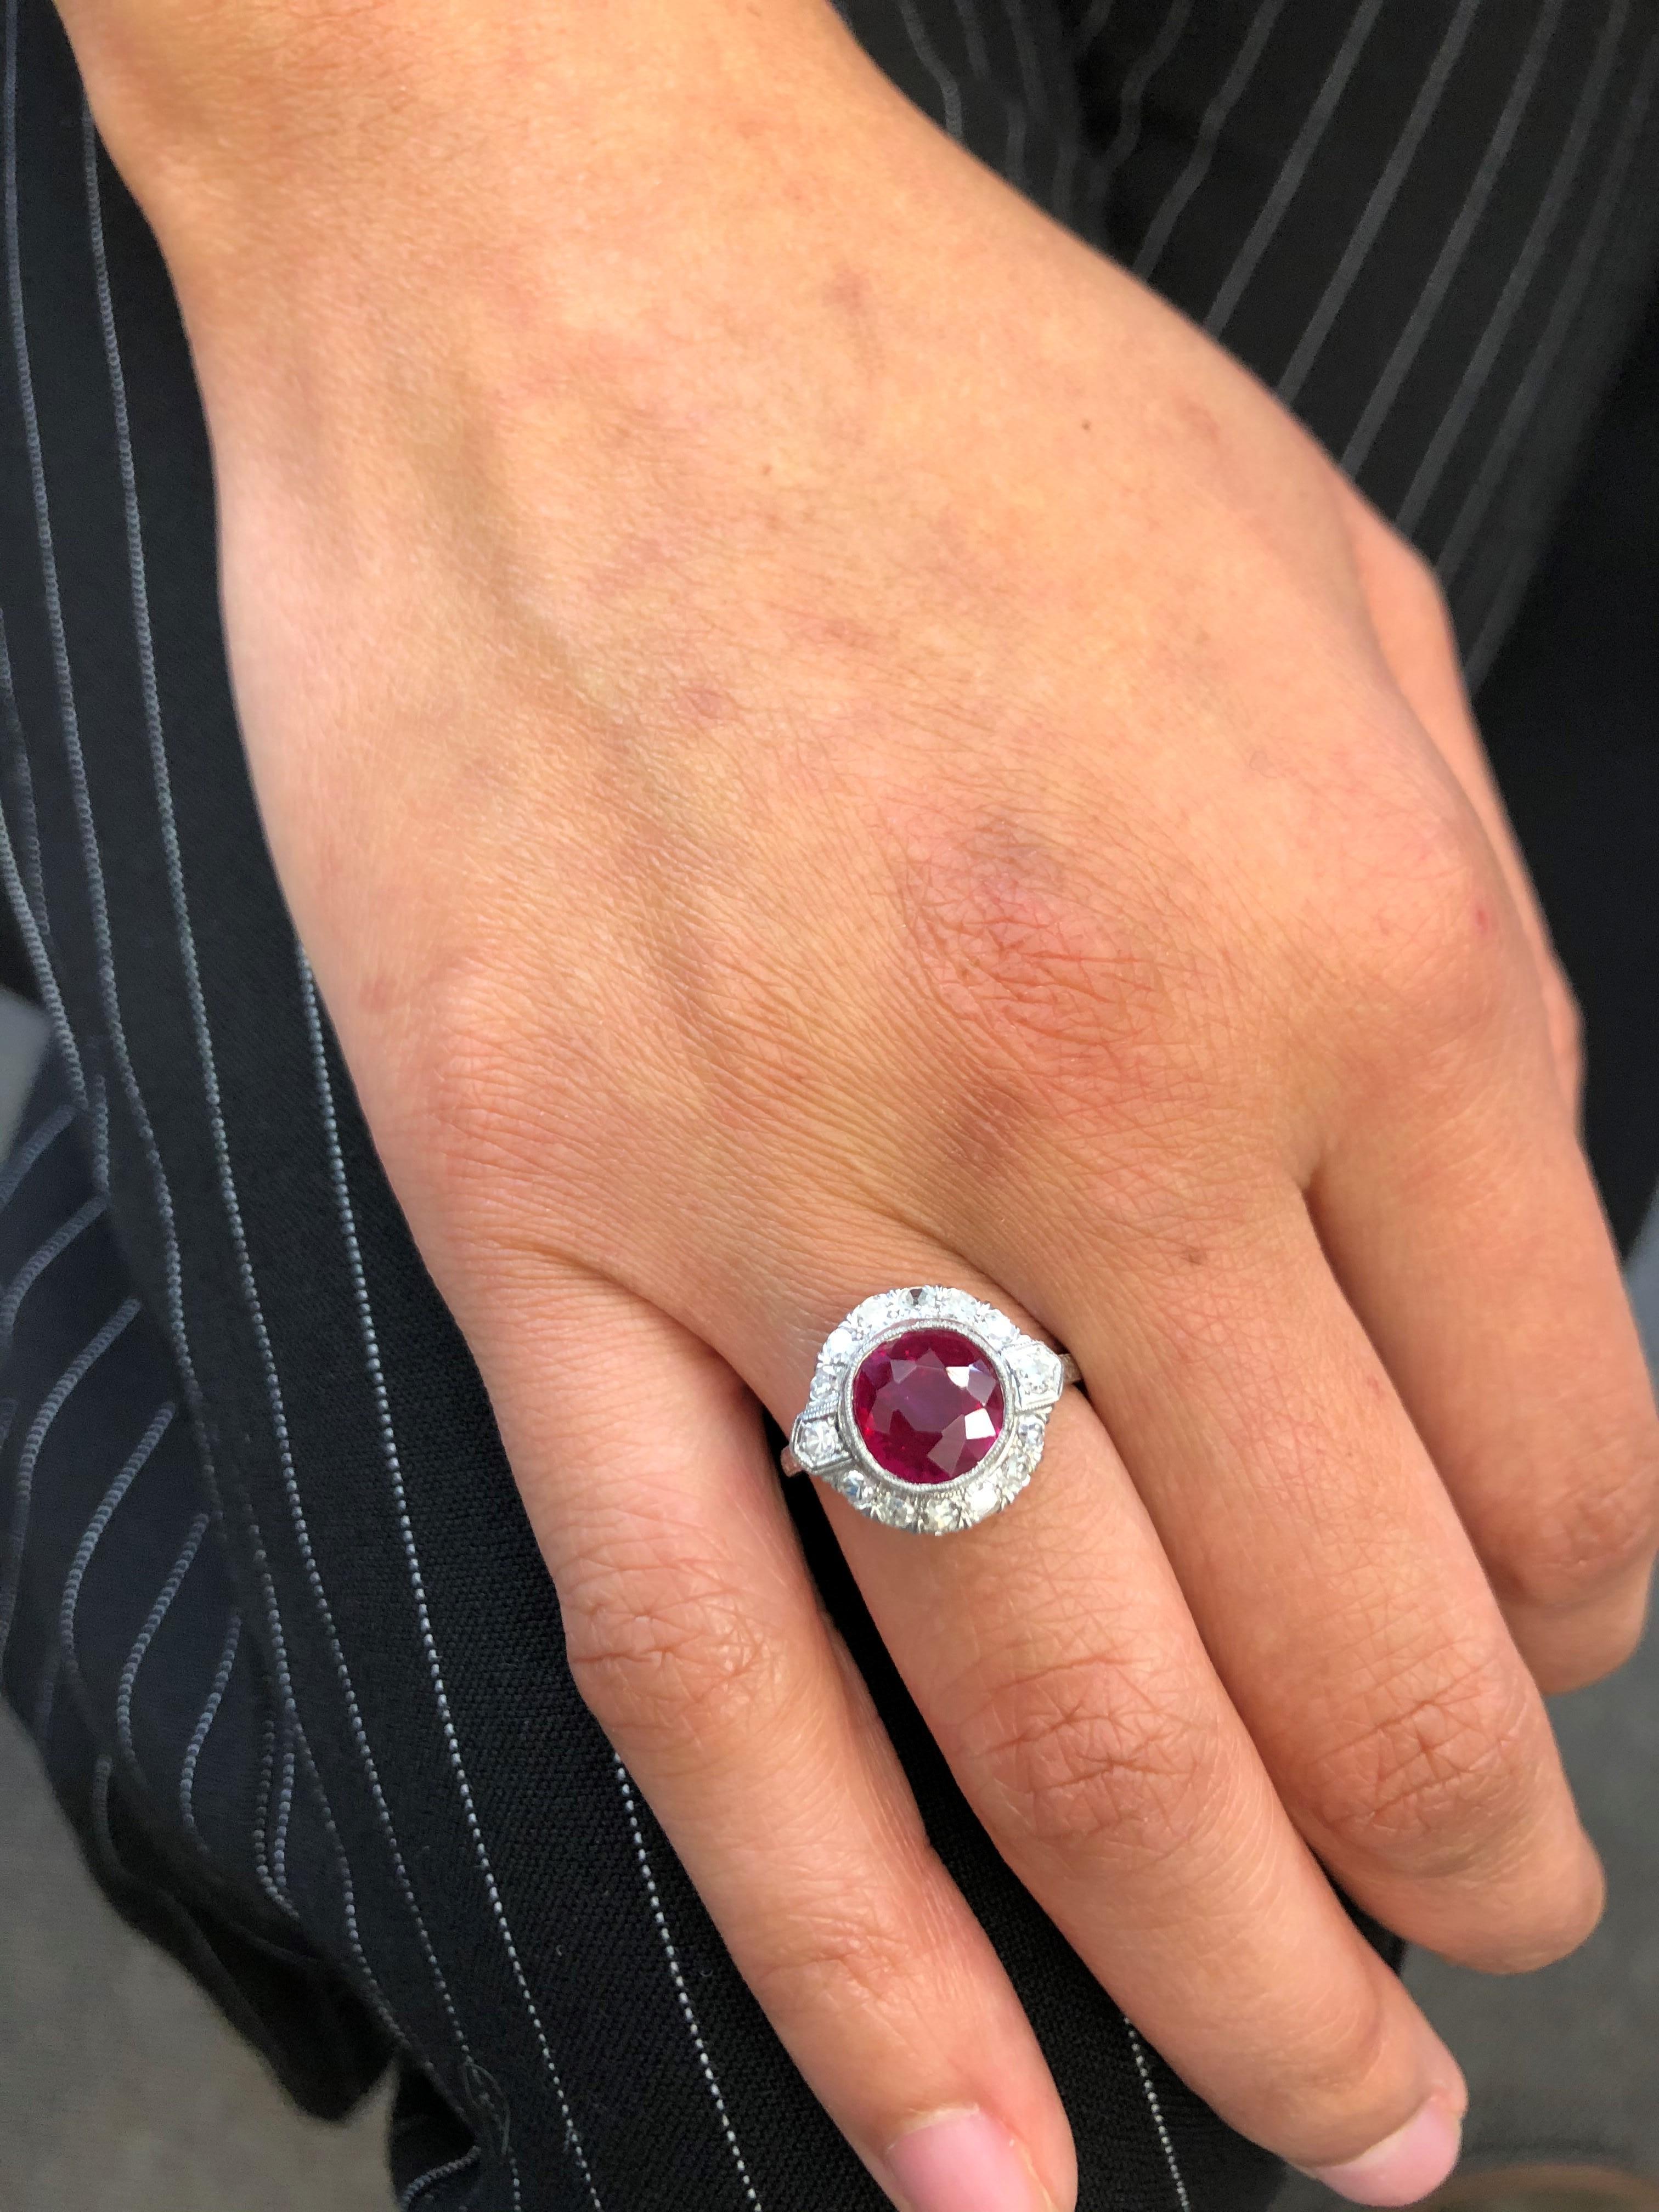 Fabulous Art Deco Ring with Burmese Ruby and Diamonds in Platinum 950 4